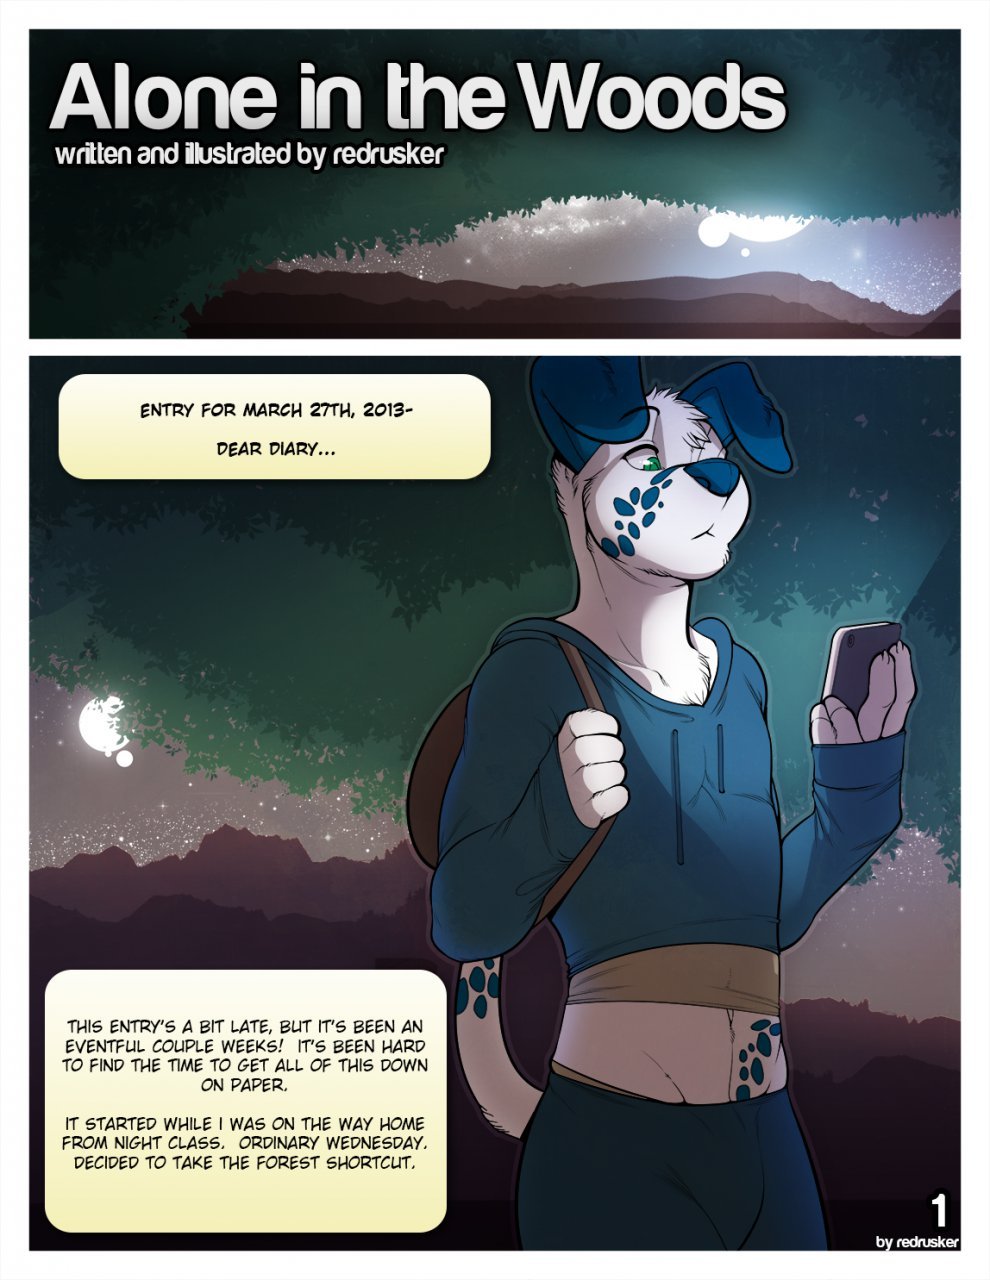 Furry gay porn comic alone in the woods